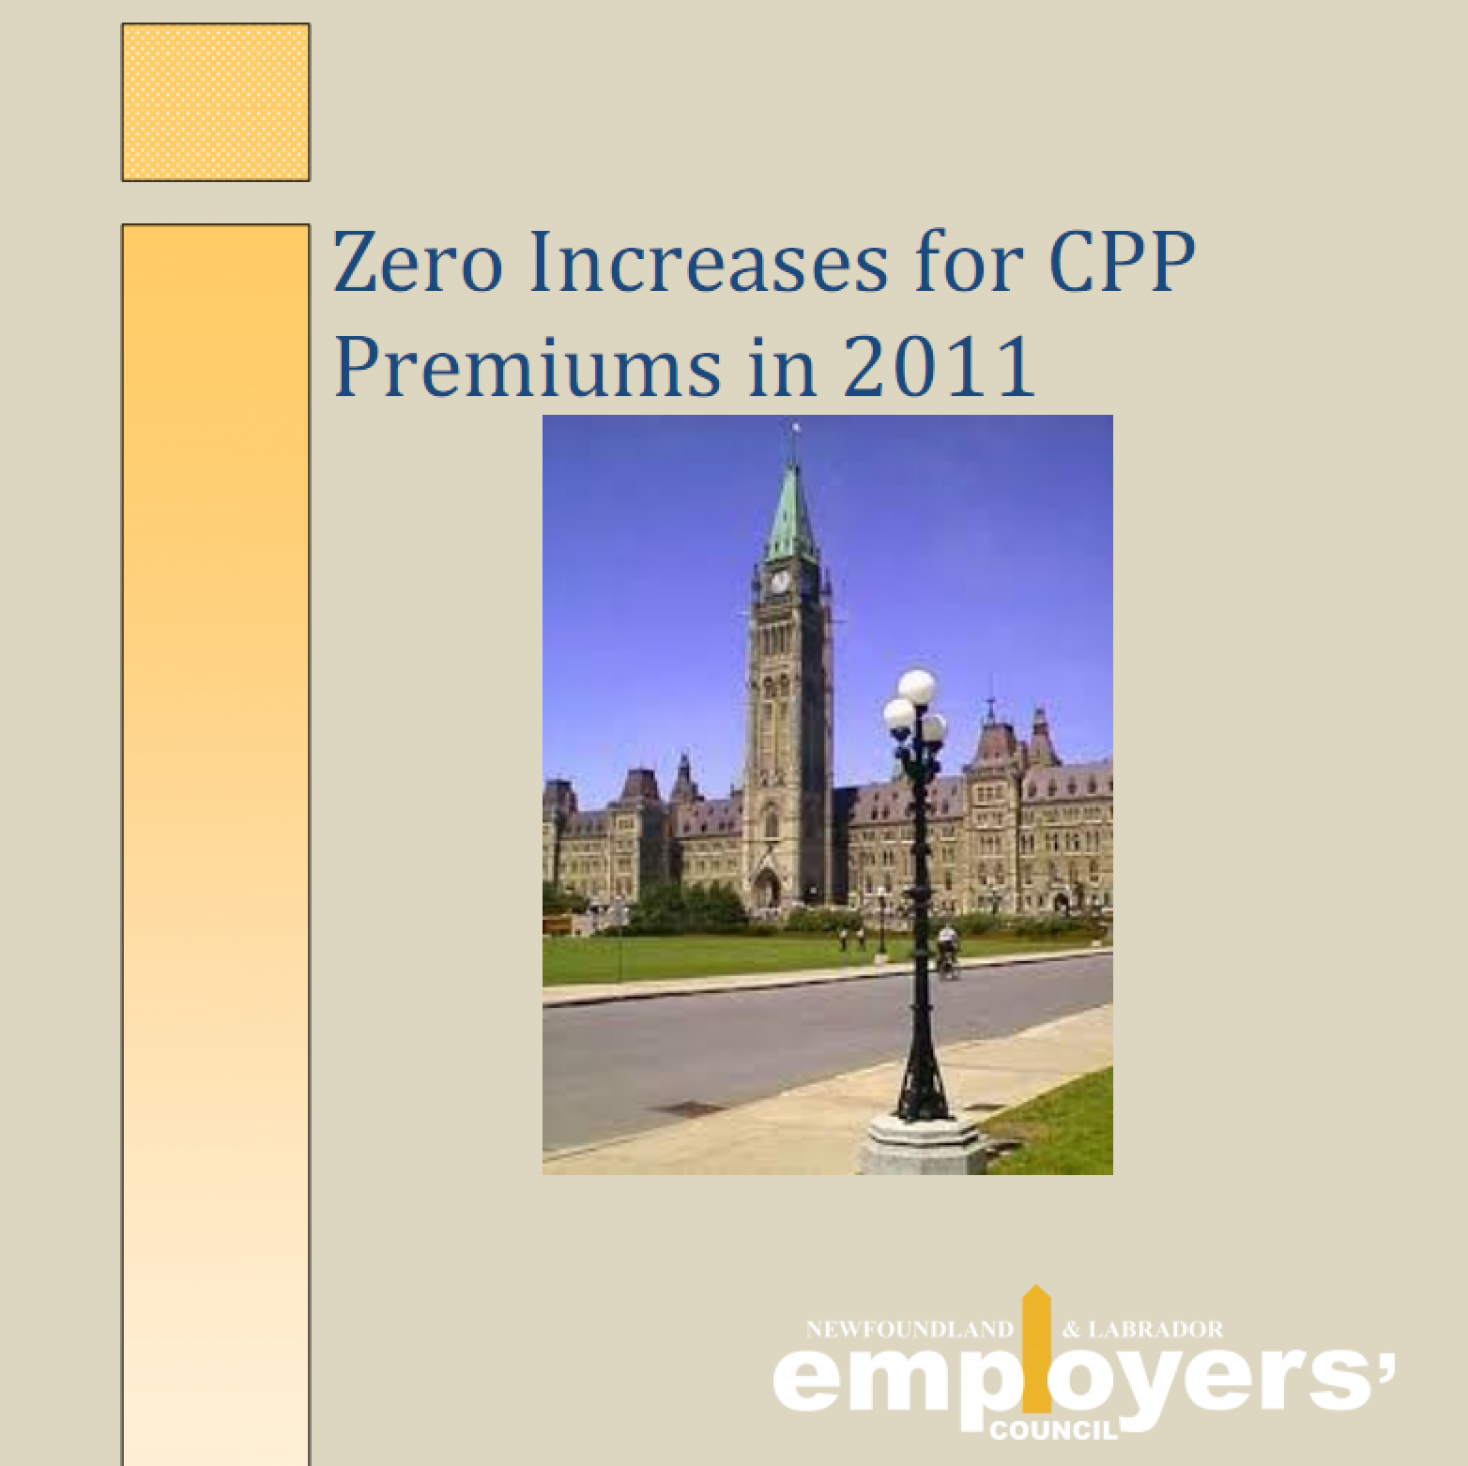 Zero Increases for CPP Premiums in 2011